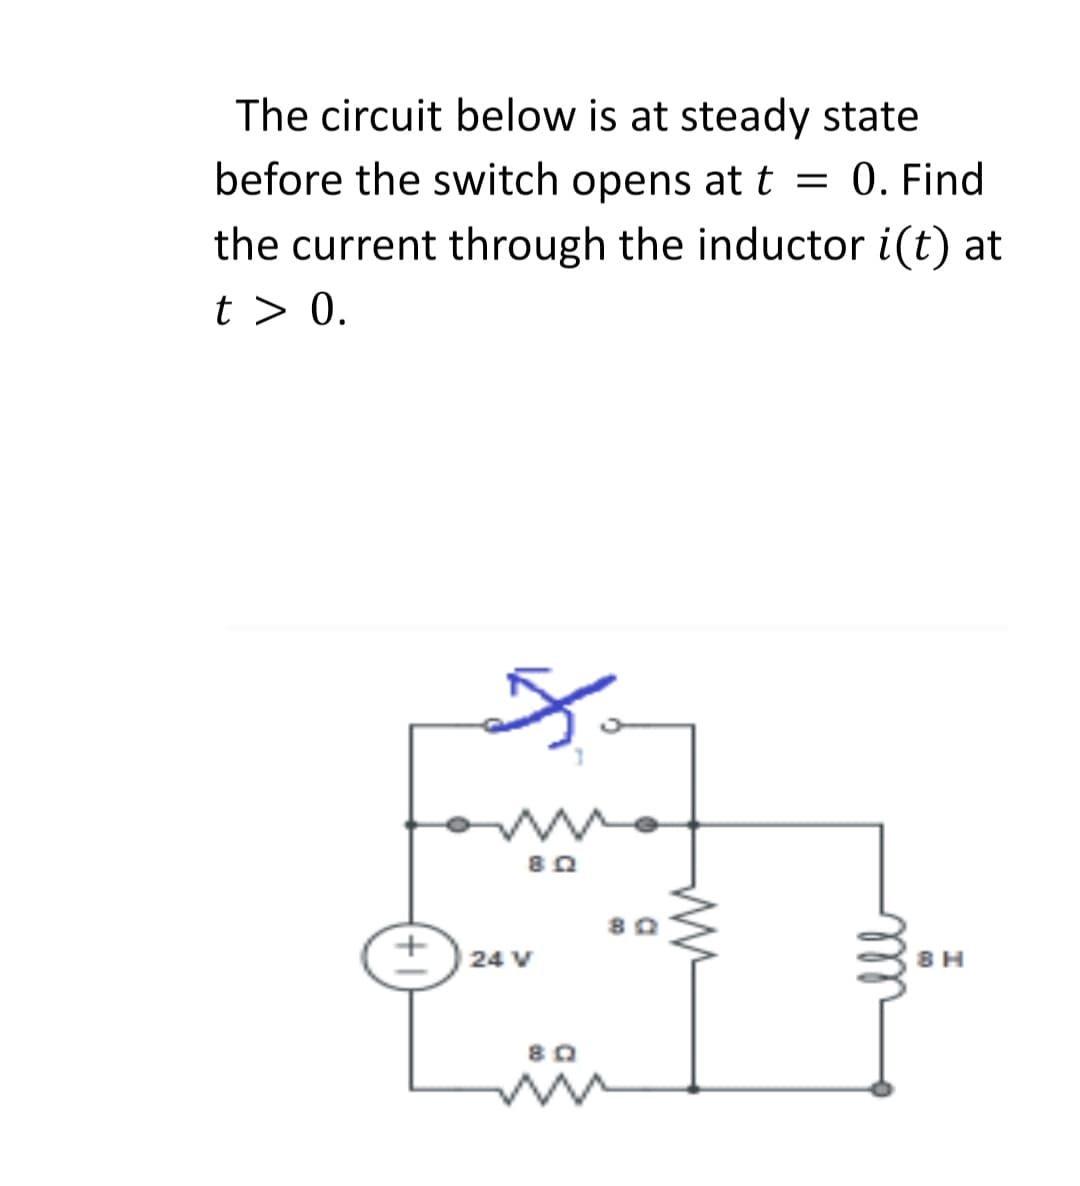 The circuit below is at steady state
before the switch opens at t = 0. Find
the current through the inductor i(t) at
t > 0.
80
24 V
8 H
+
